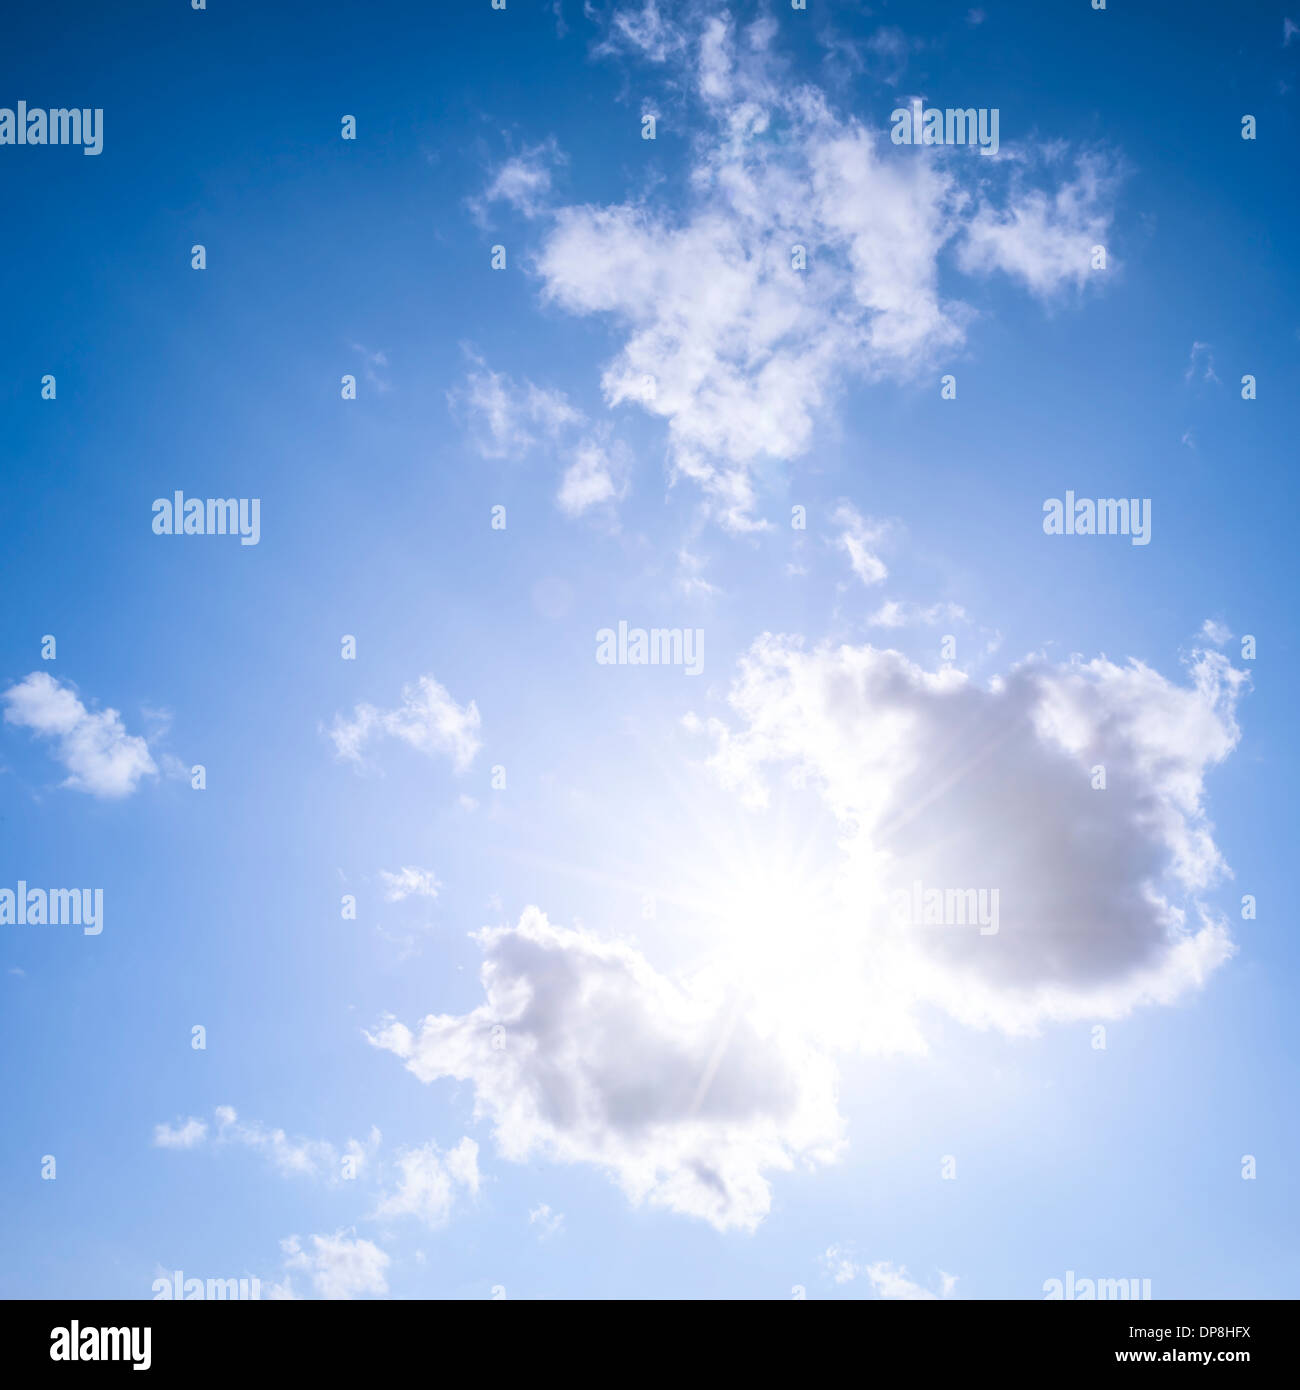 Square blue sky background with bright sun flare shining through clouds Stock Photo